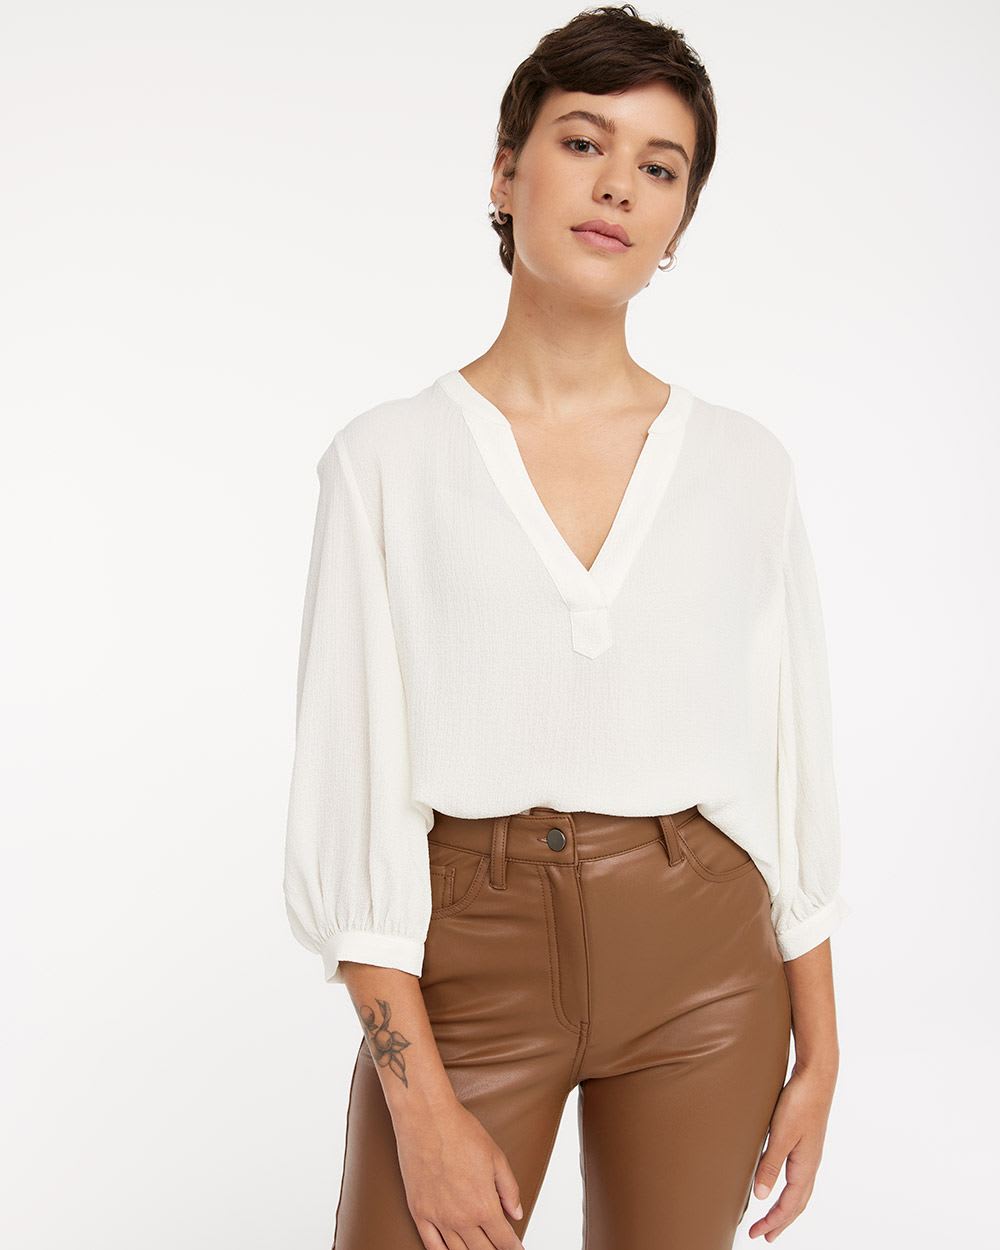 Bustier Effect Top with Elbow Sleeves